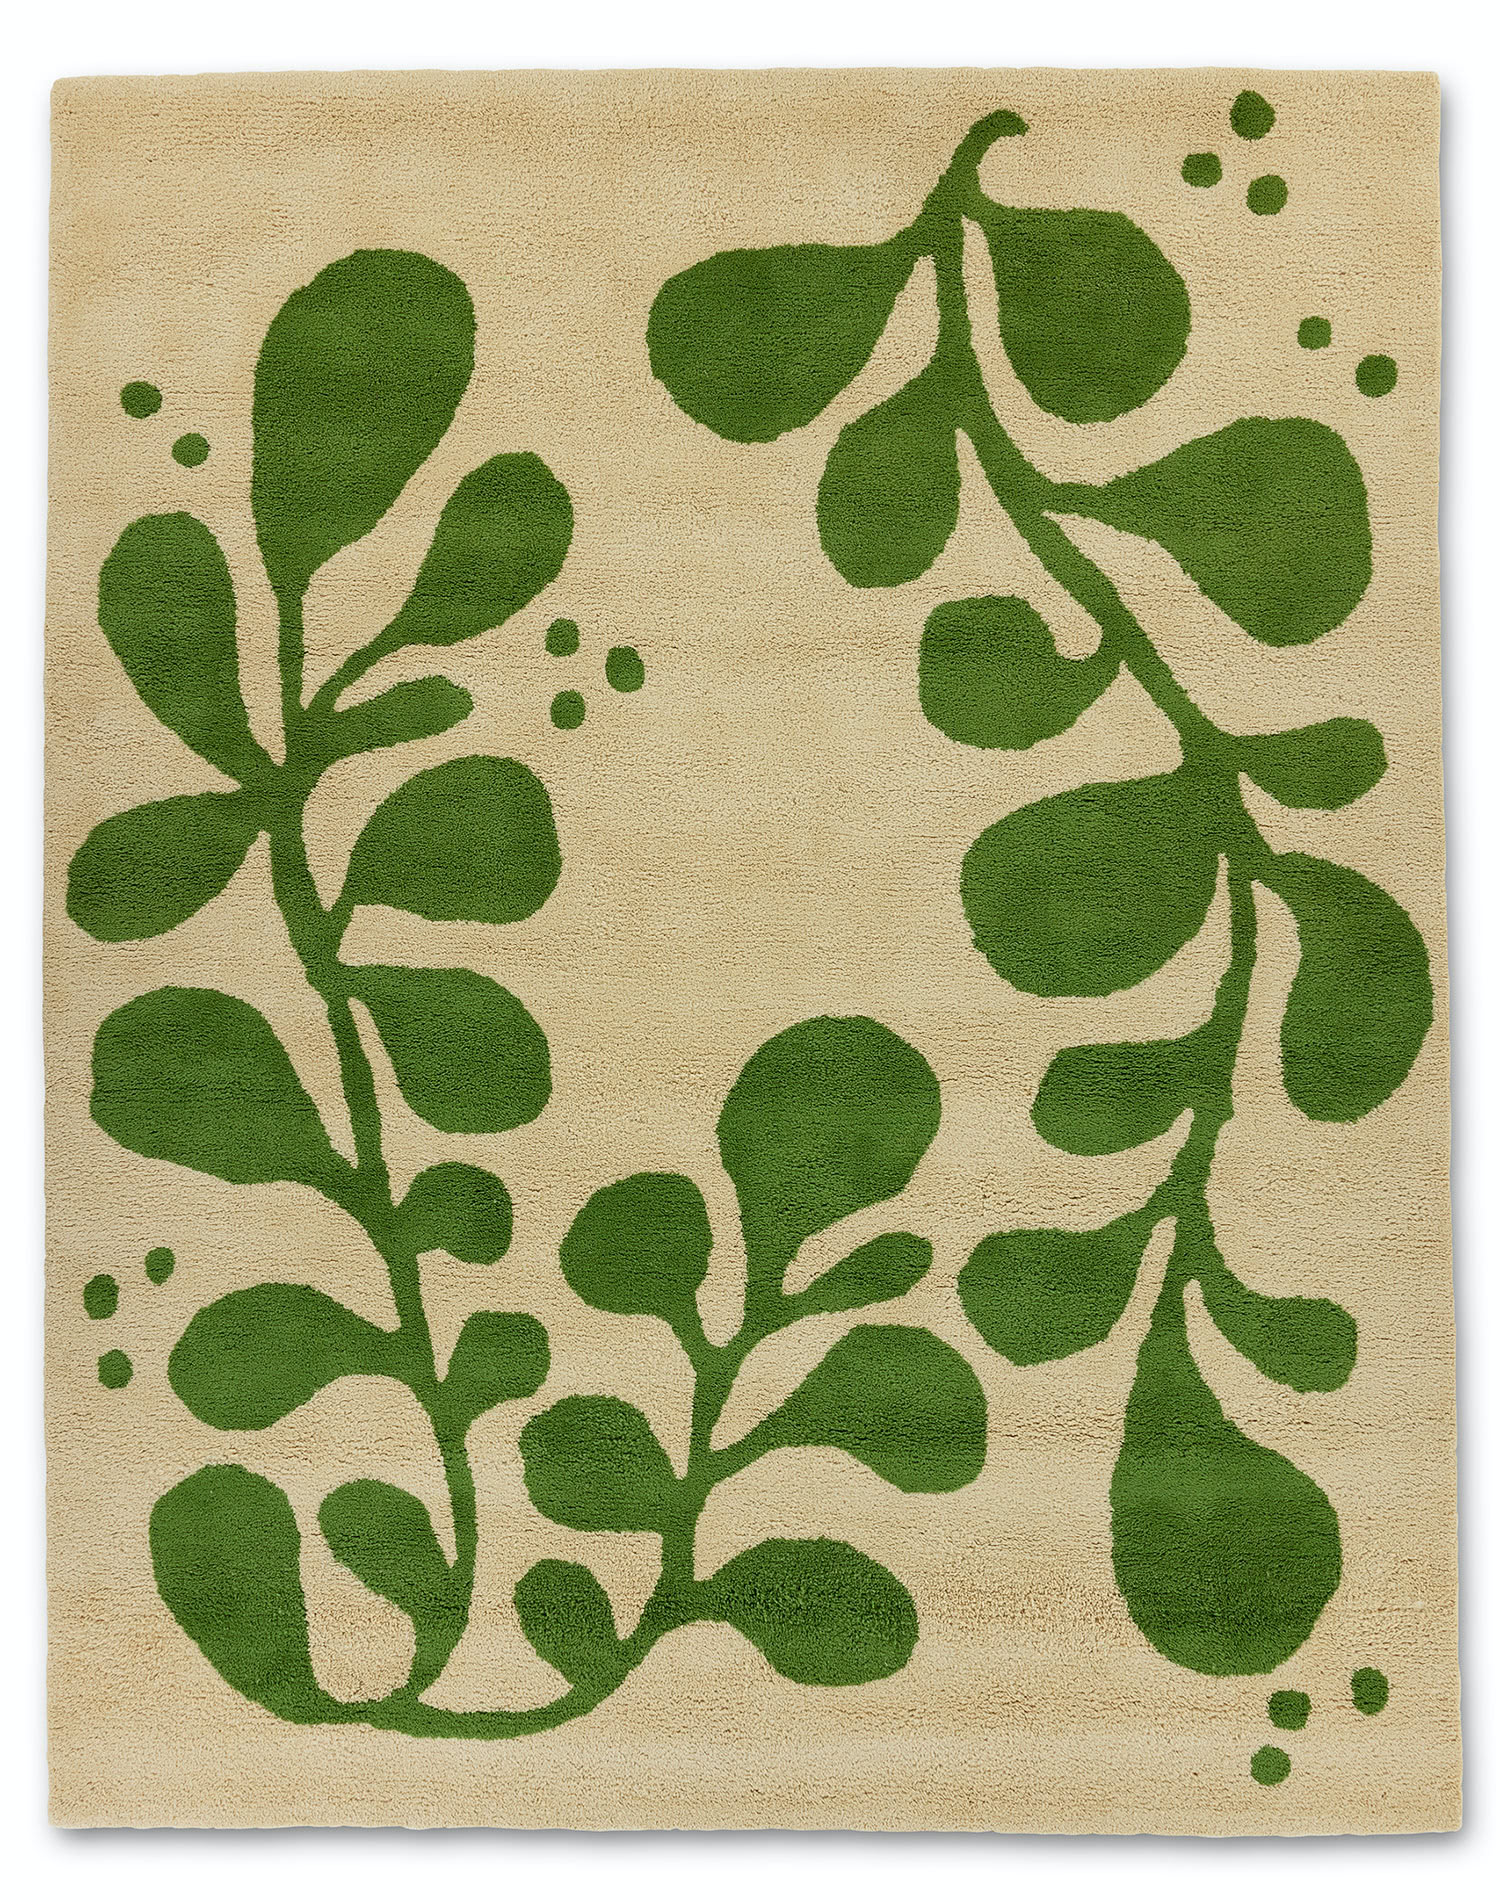 A neutral and green area rug with abstract designs on it called Vine Mambo